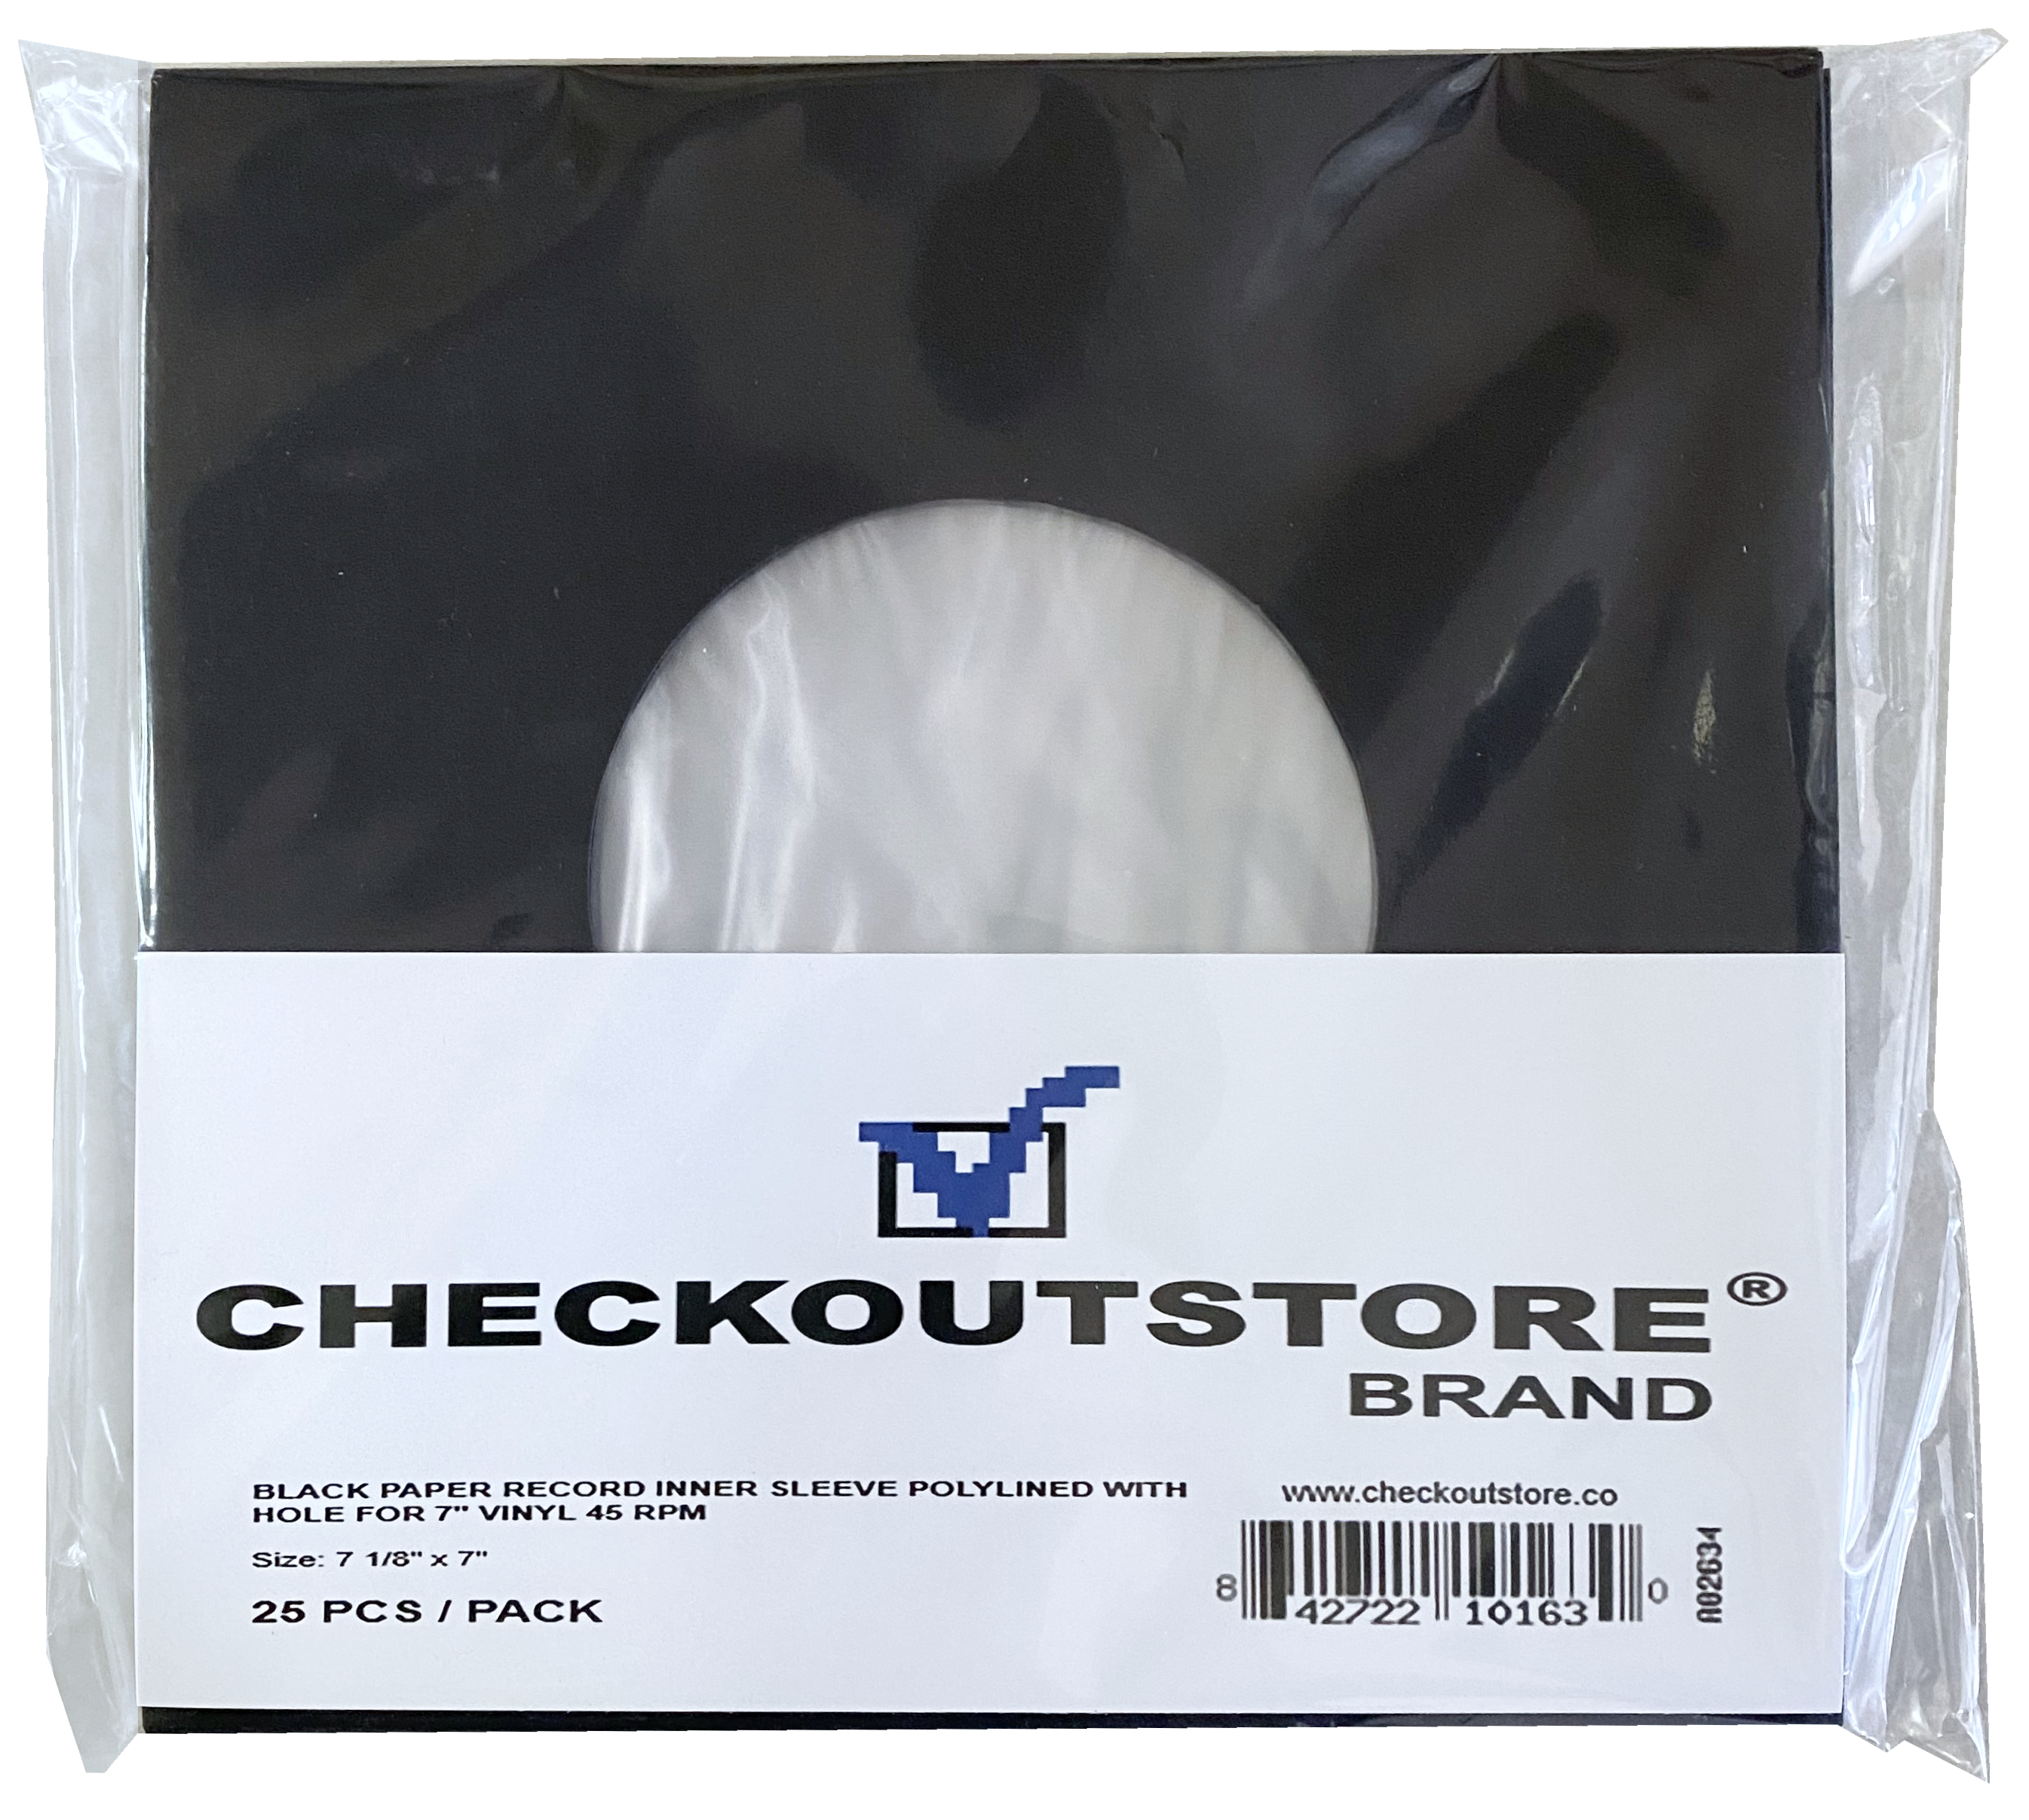 CheckOutStore 200 CheckOutStore Black Paper Record Sleeves Polylined With Hole for 7" Vinyl 45 RPM Records (Inner Sleeves)